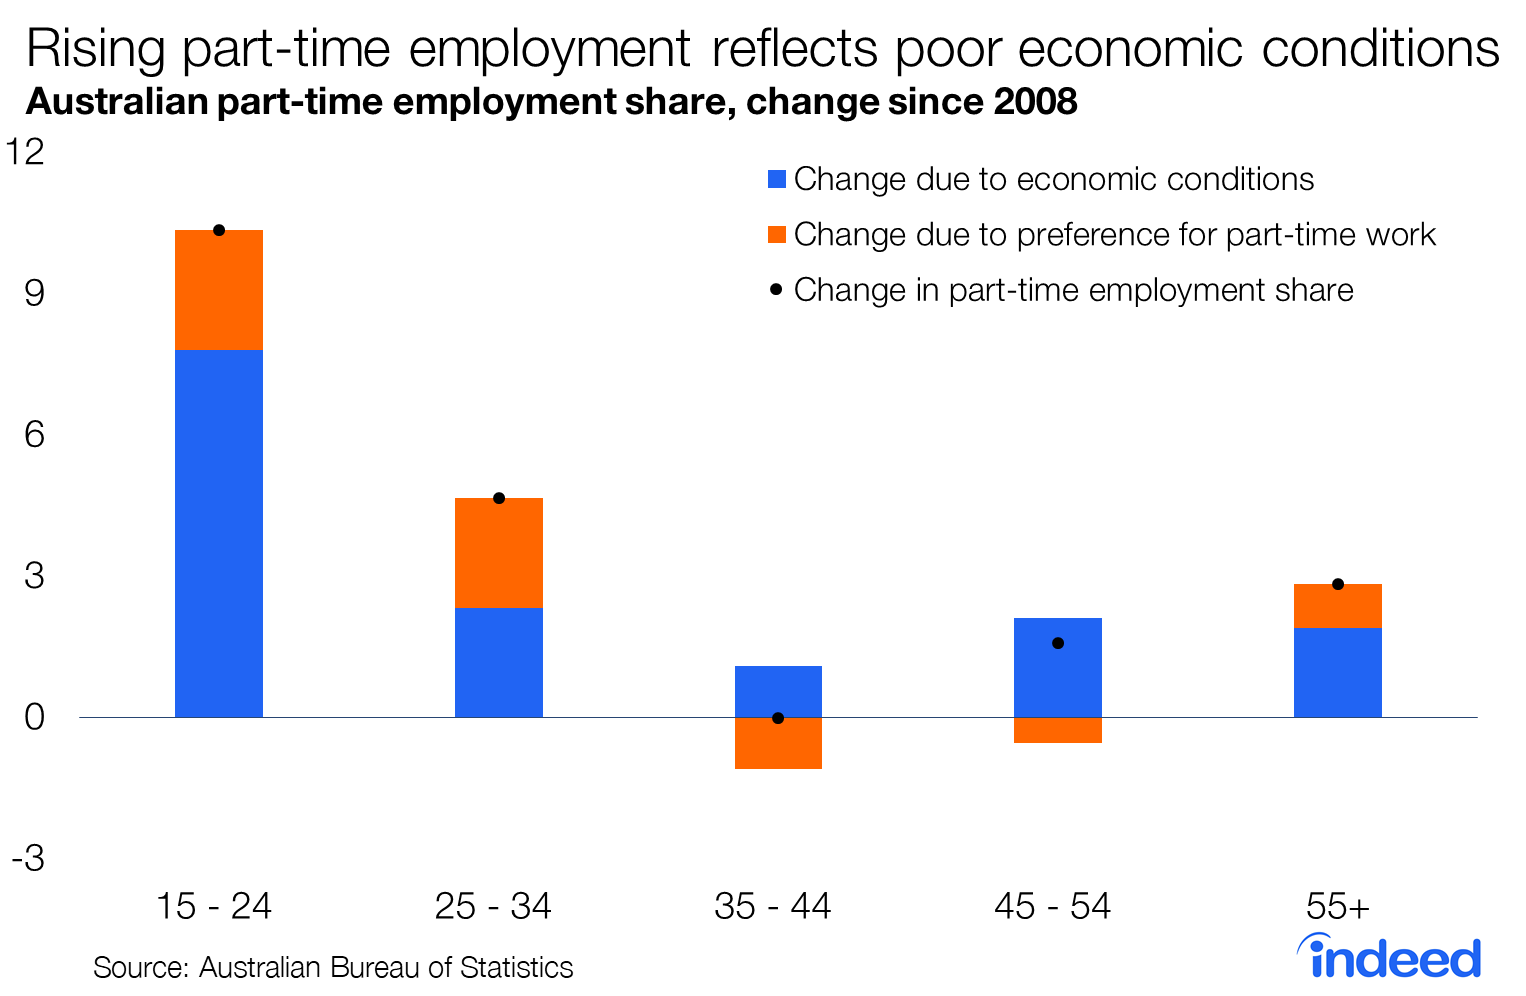 Rising part-time employment reflects poor economic conditions in Australia